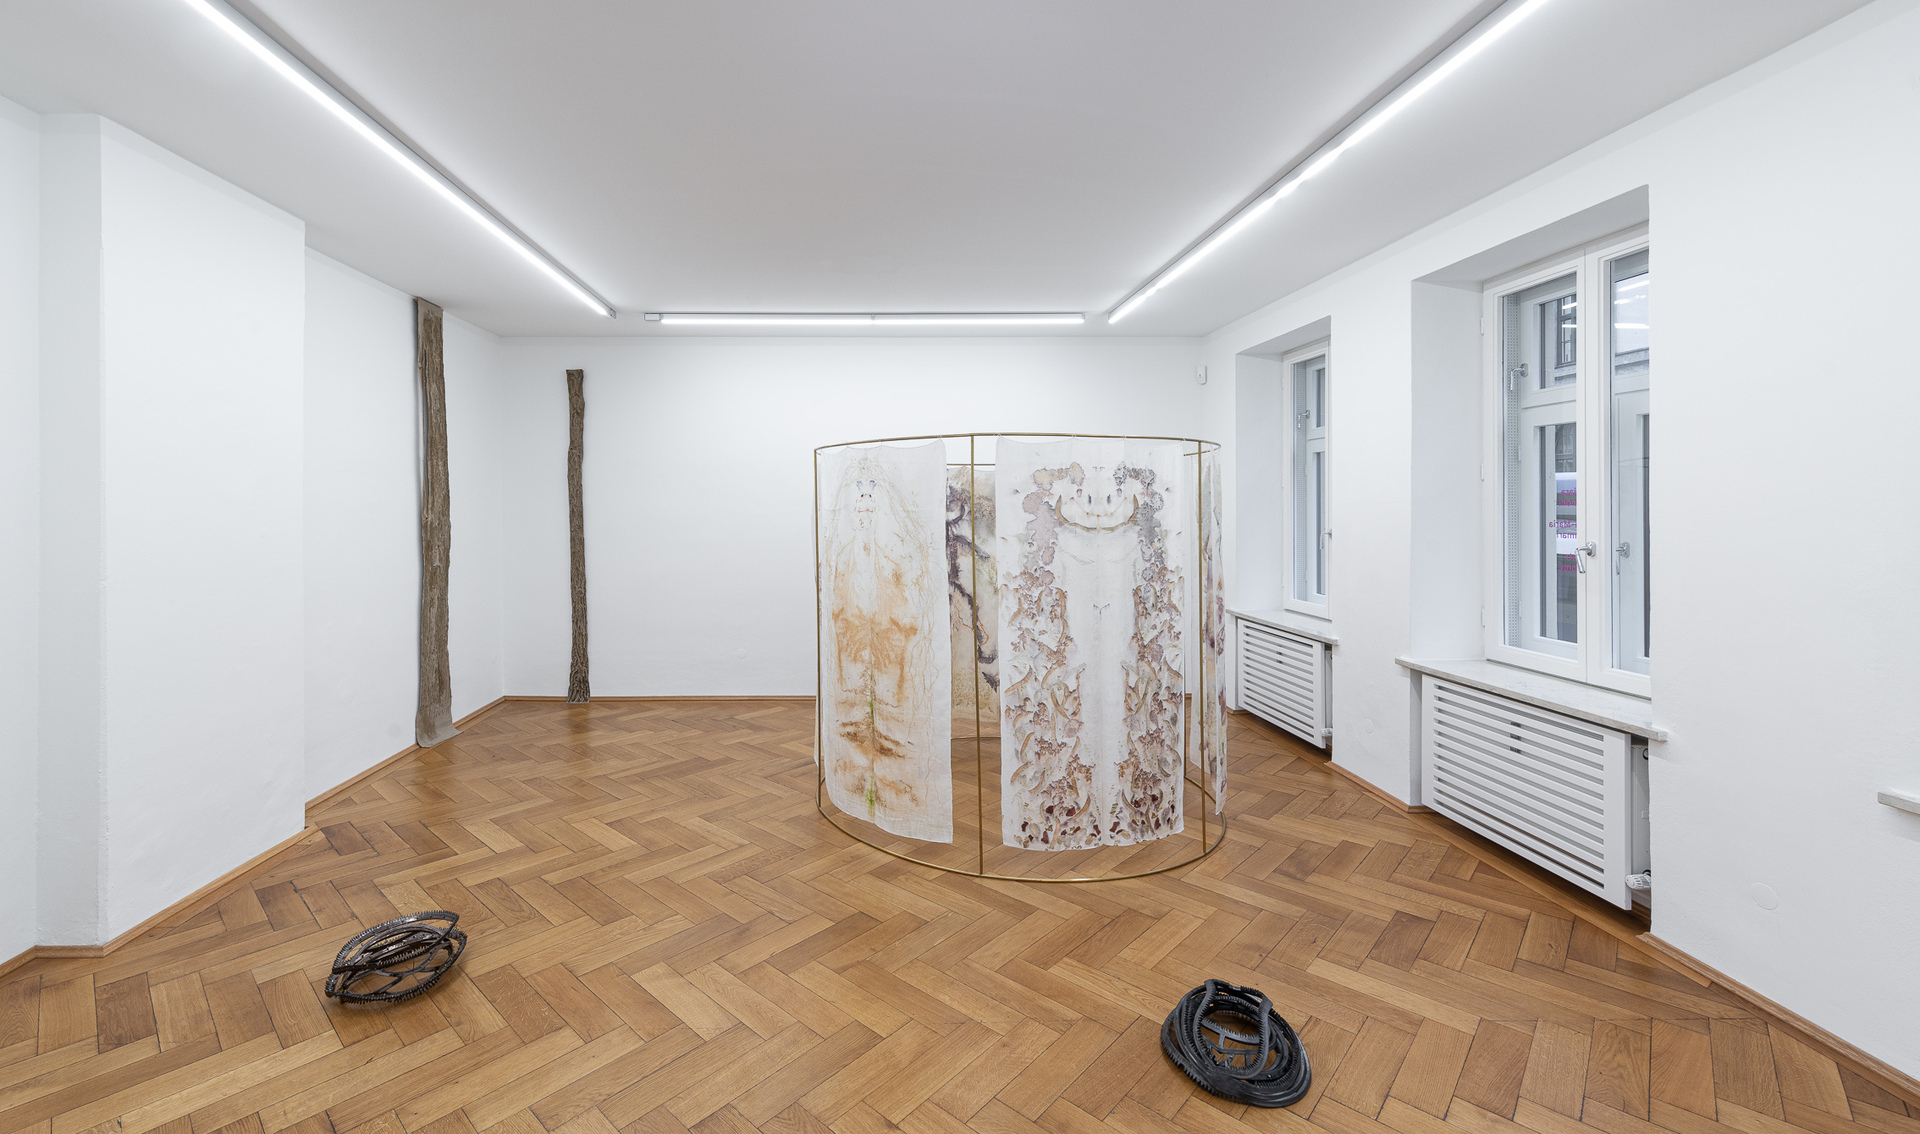 Installation view of the exhibition "On Survival" with works by Helene Appel, Chiara Camoni & the workshop participants at Mostyn (Wales) and Hanna-Maria Hammari, Galerie Britta Rettberg, 2021